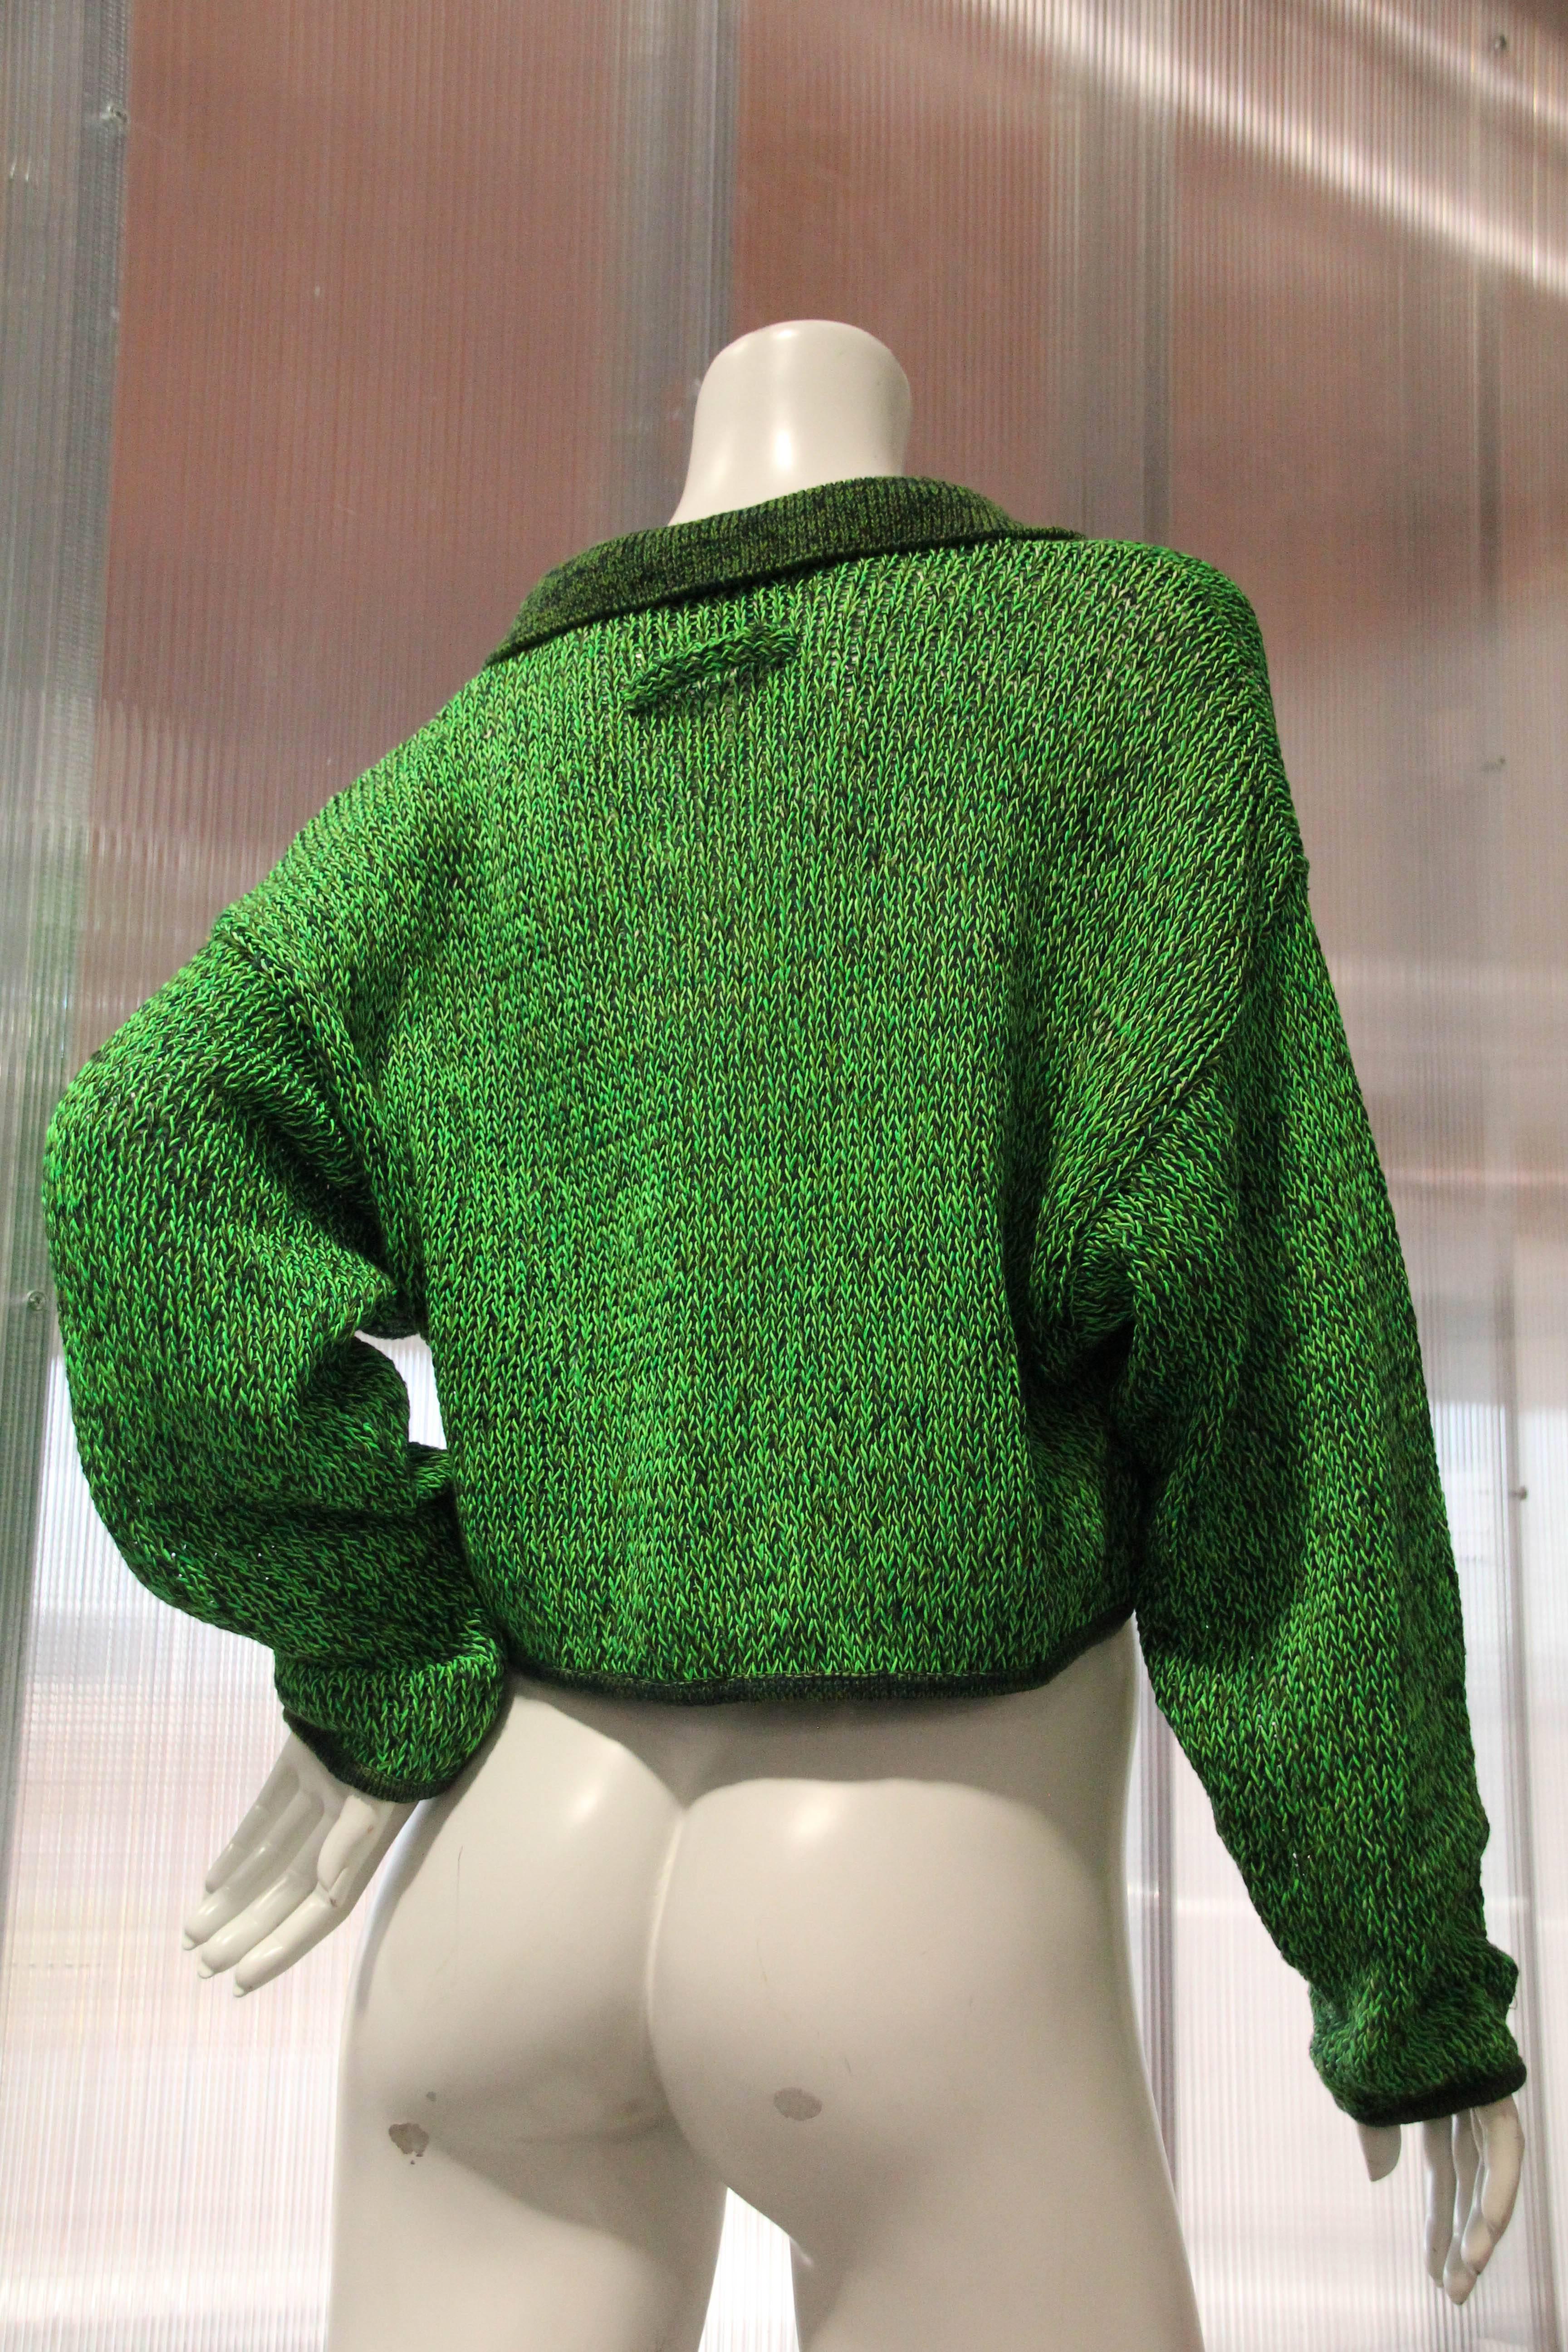 1980s Jean Paul Gaultier Cropped Zip-Front Sweater in Neon Green and Black 1